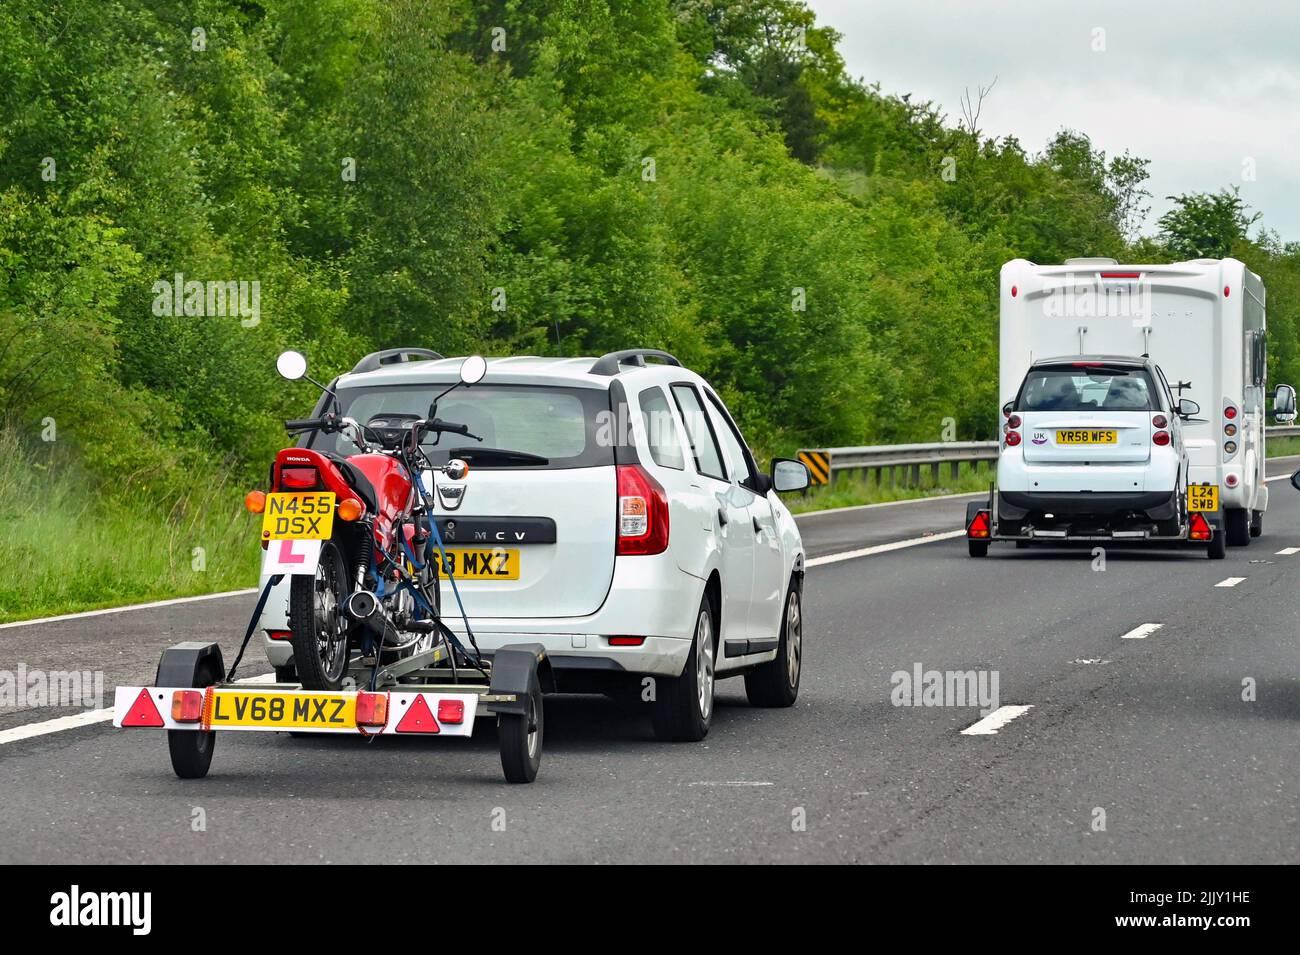 Swindon, England - May 2022: Car pulling a trailer loaded with a motorbike Stock Photo